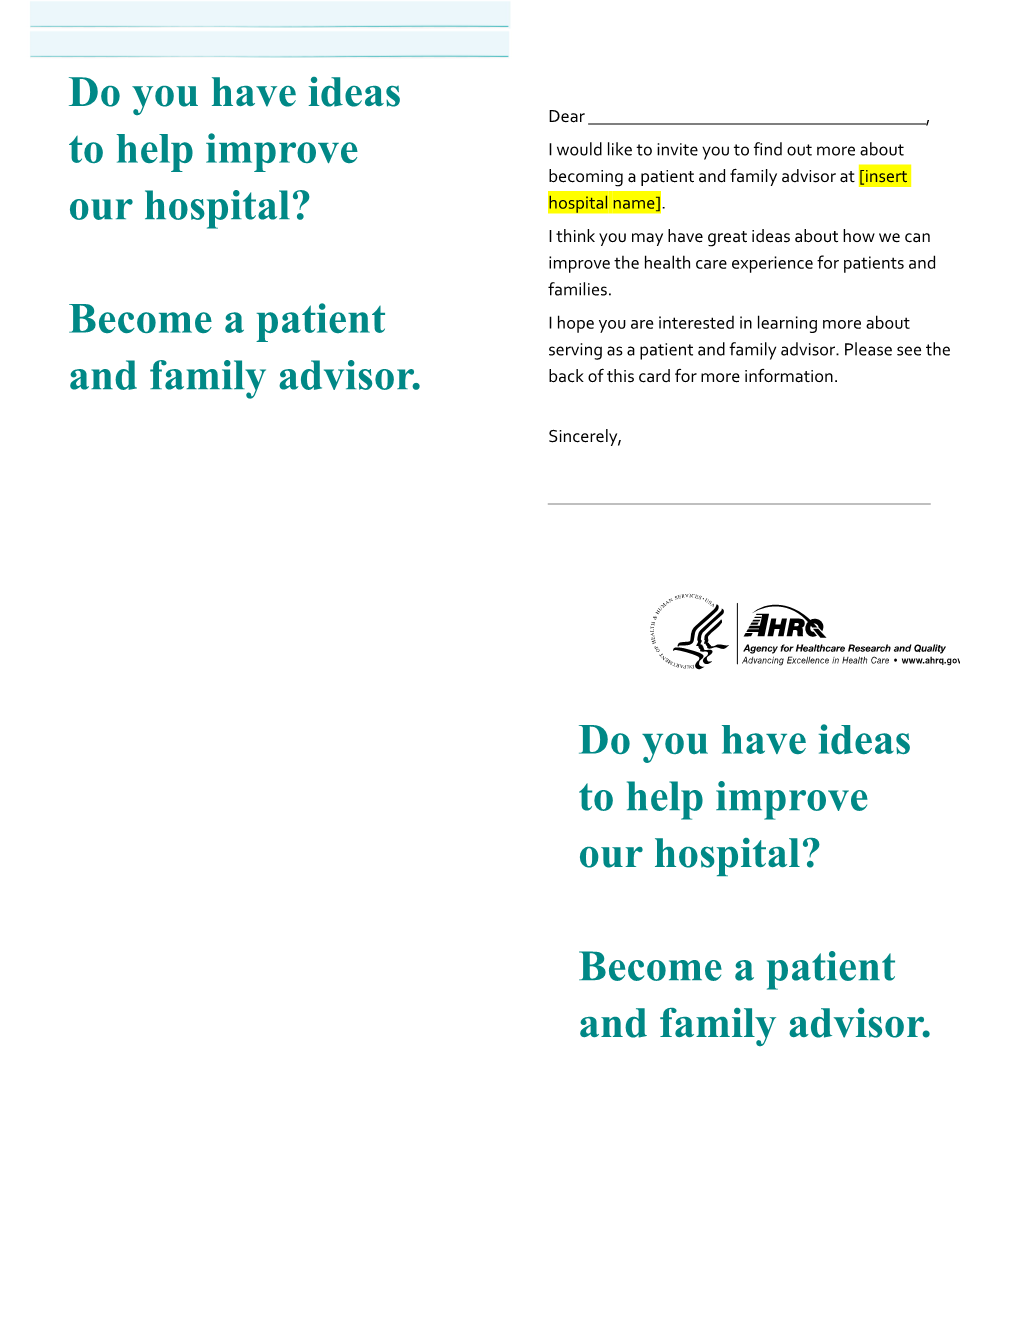 Strategy 1: Working with Patients & Families As Advisors (Tool 2)